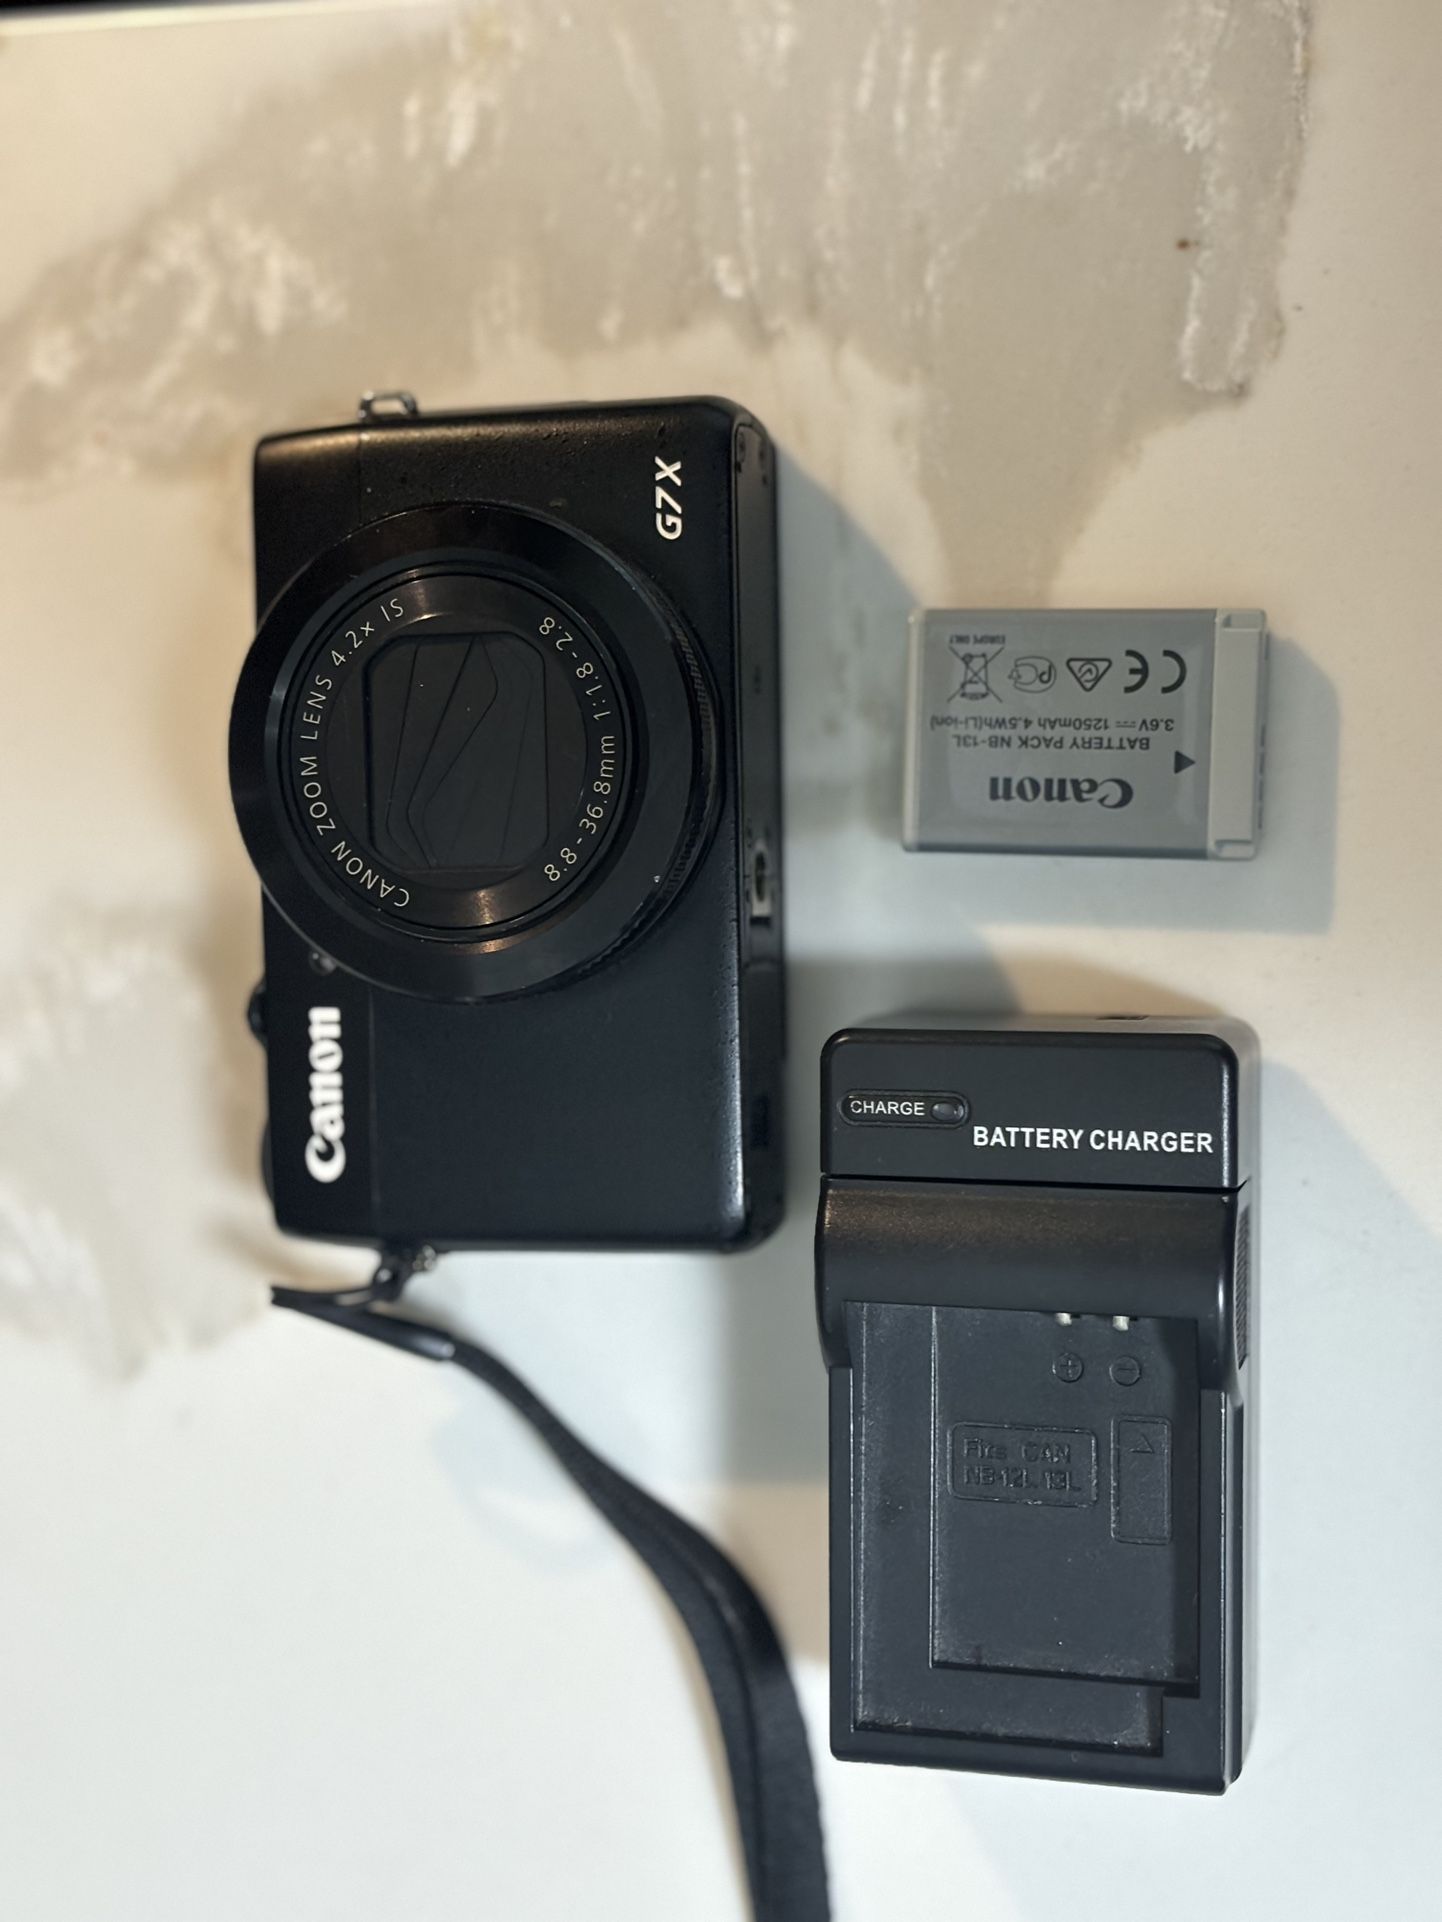 Canon Power Shot G7 X Mark ii . serial no 0(contact info removed)2